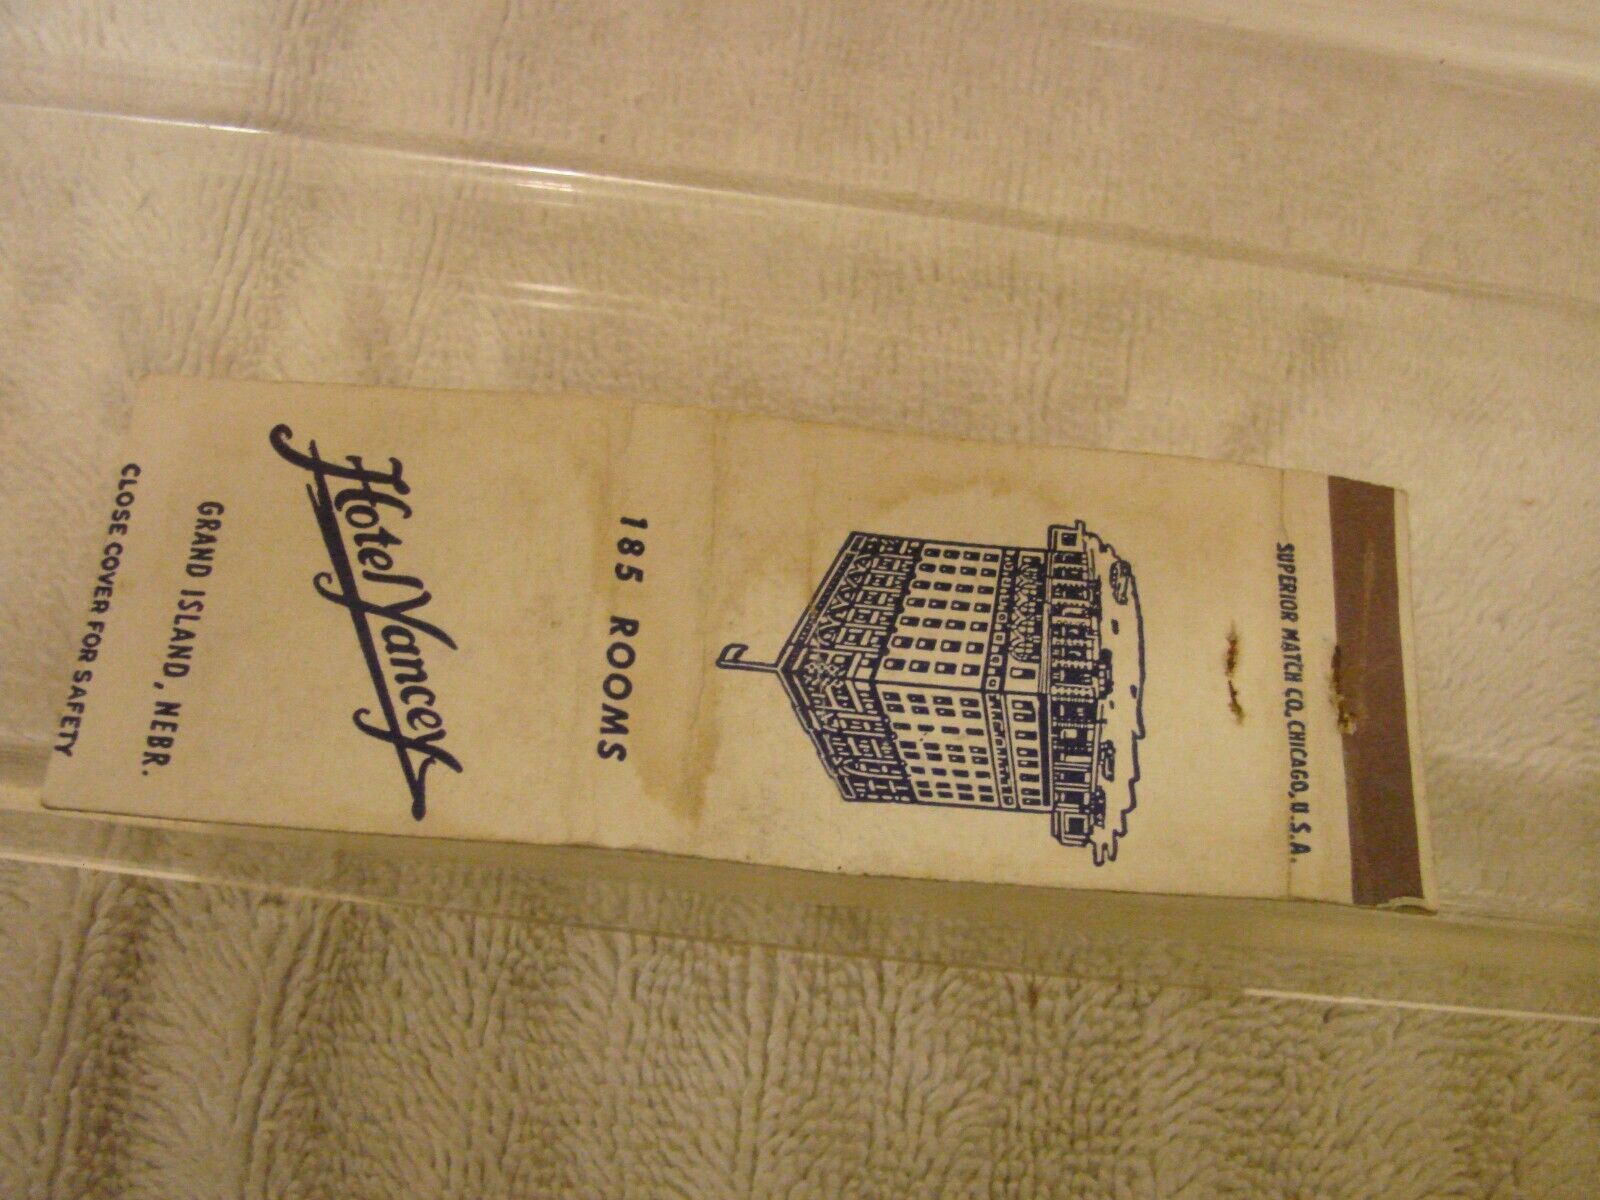 HOTEL YANCEY OLD GRAND ISLAND MATCHBOOK COVER 185 ROOMS 